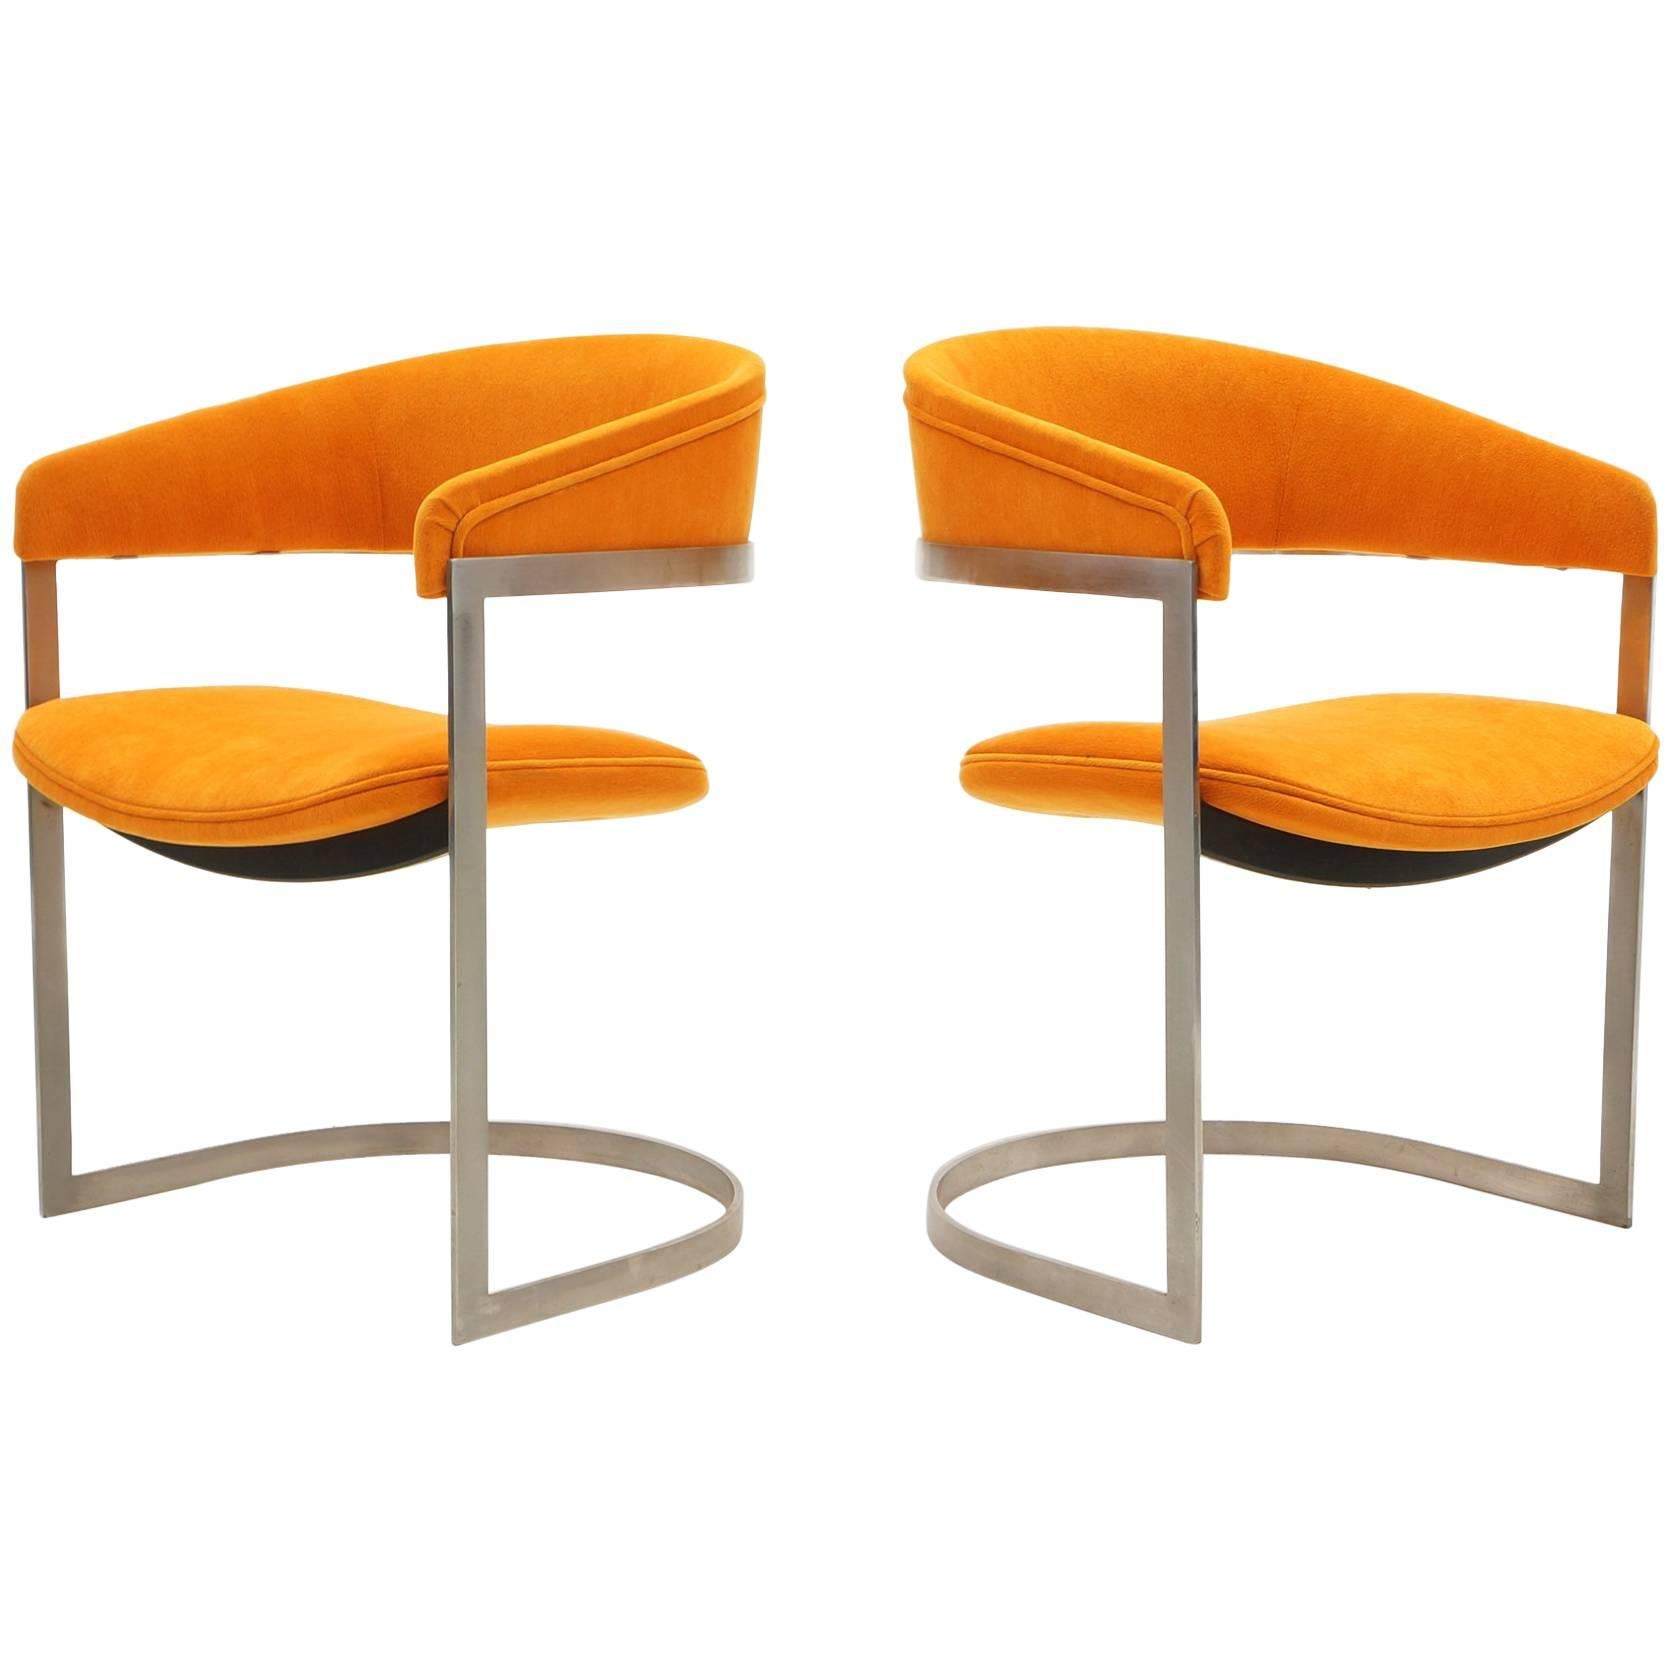 Milo Baughman Style Occasional Chairs, Brushed Steel and Orange, Excellent